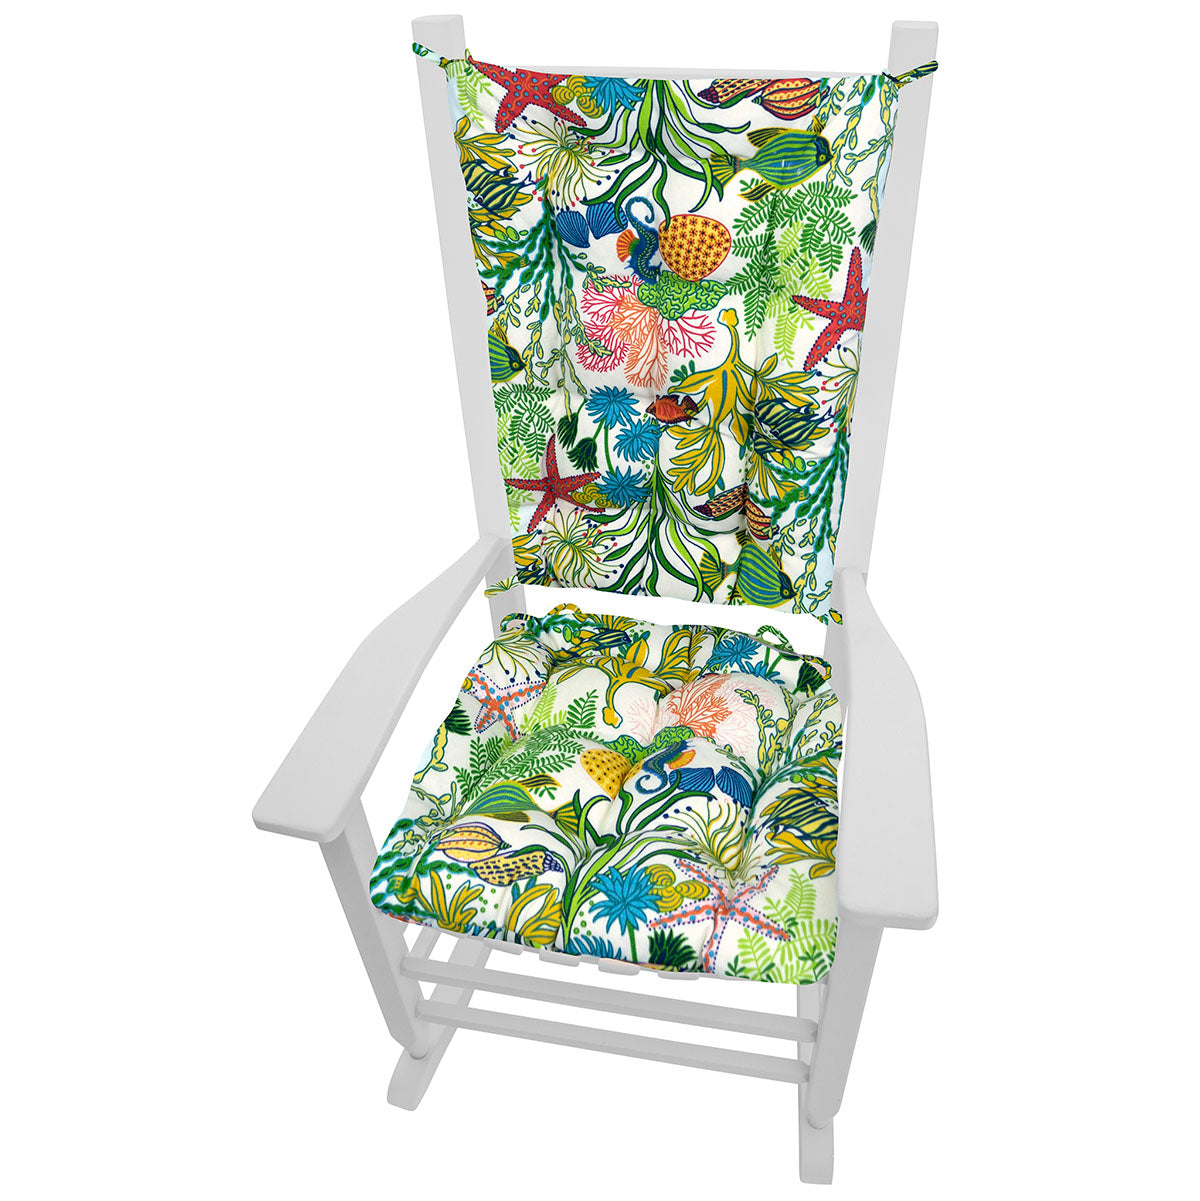 Manalay Bay Multi Outdoor Porch Rocking Chair Cushions